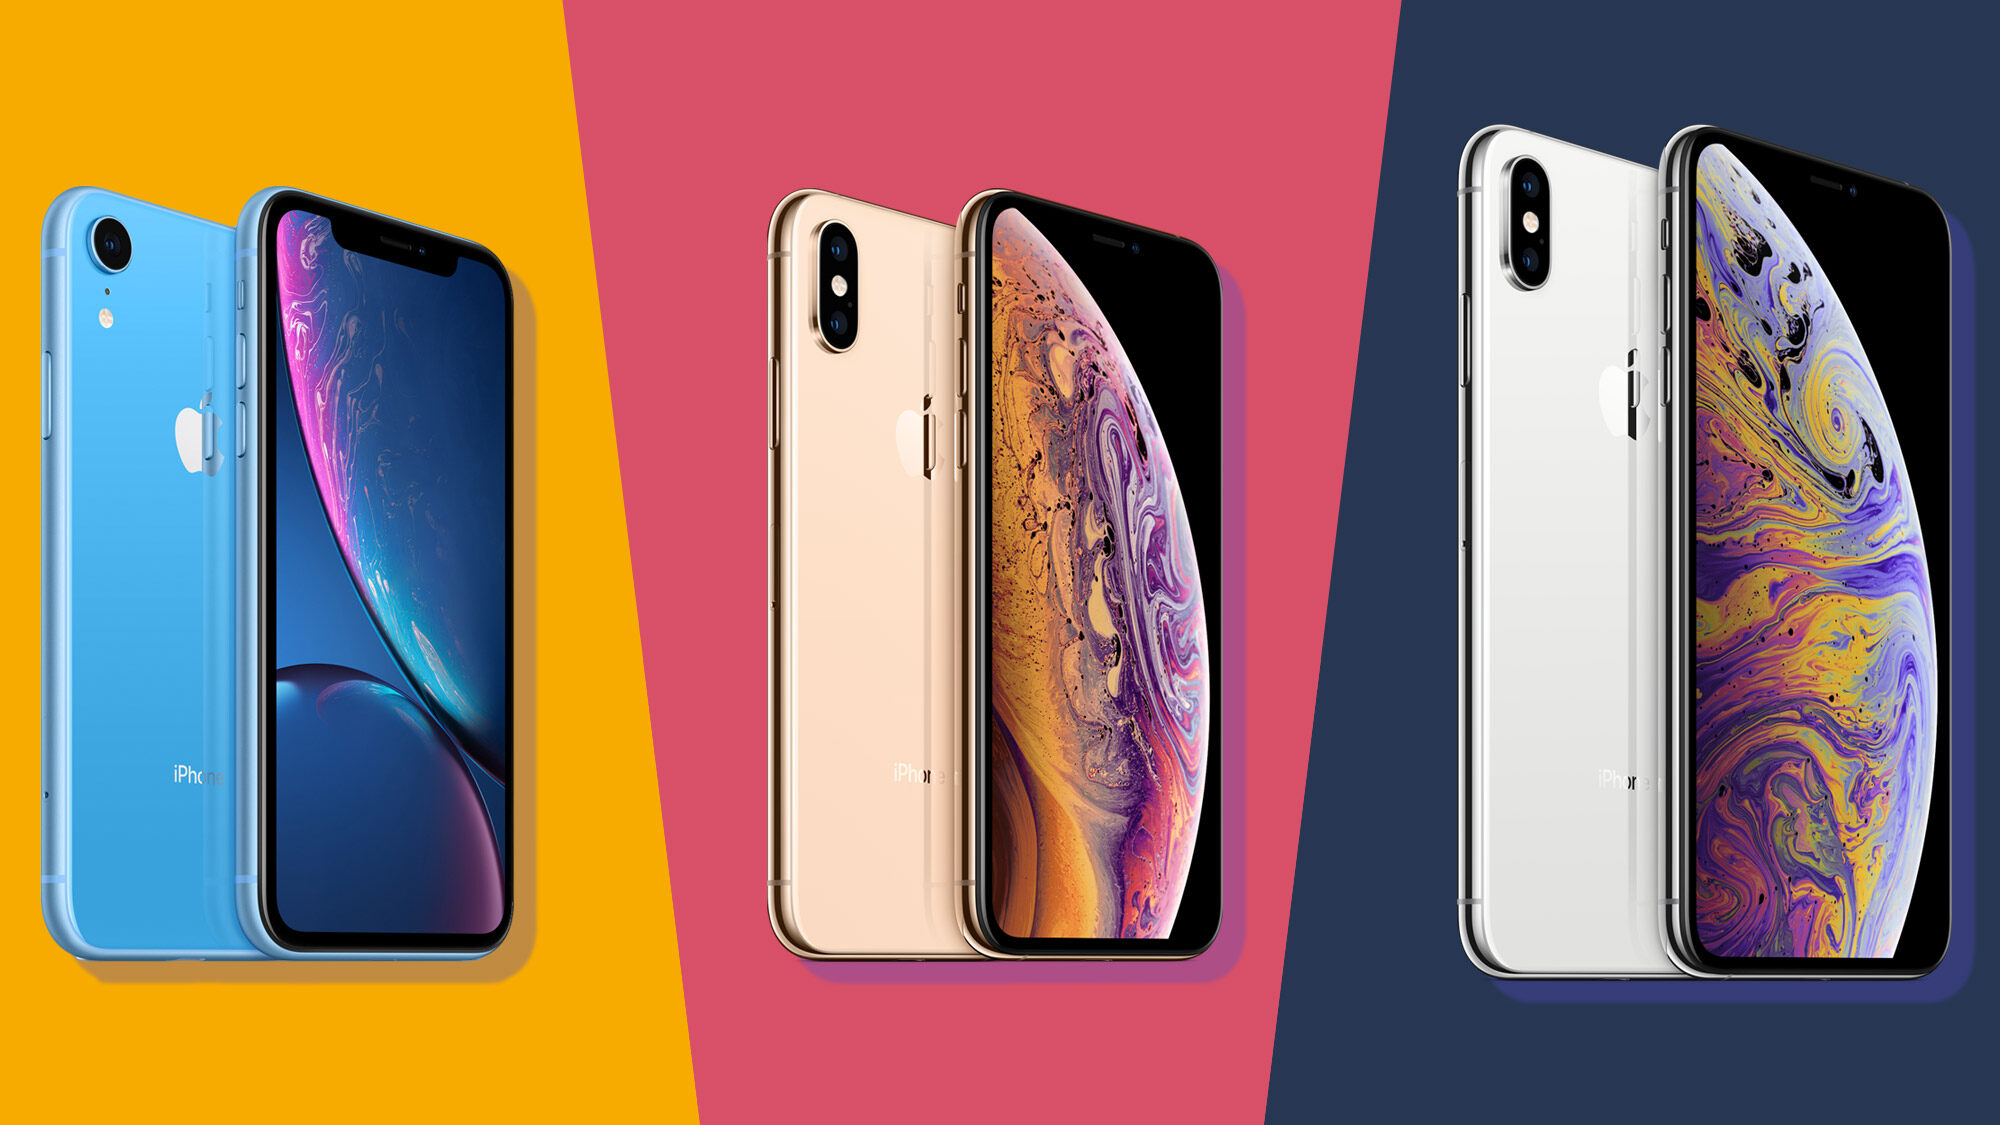 iphone-xs-xs-max-xr-specs-features-price-release-date-and-more